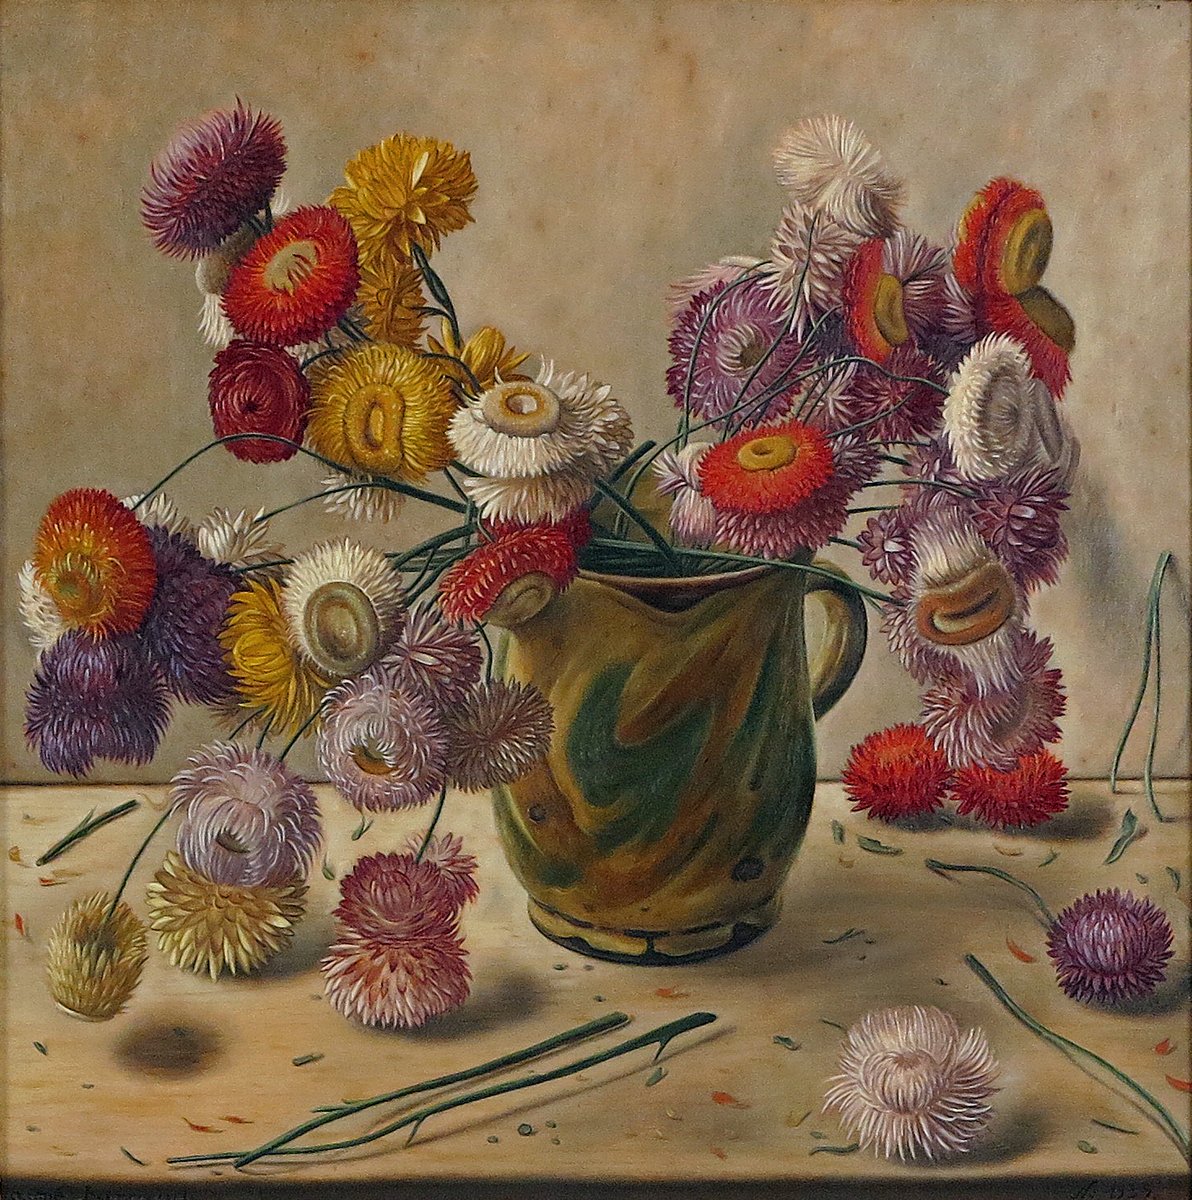 Still life with Flowers in Ceramic Jug